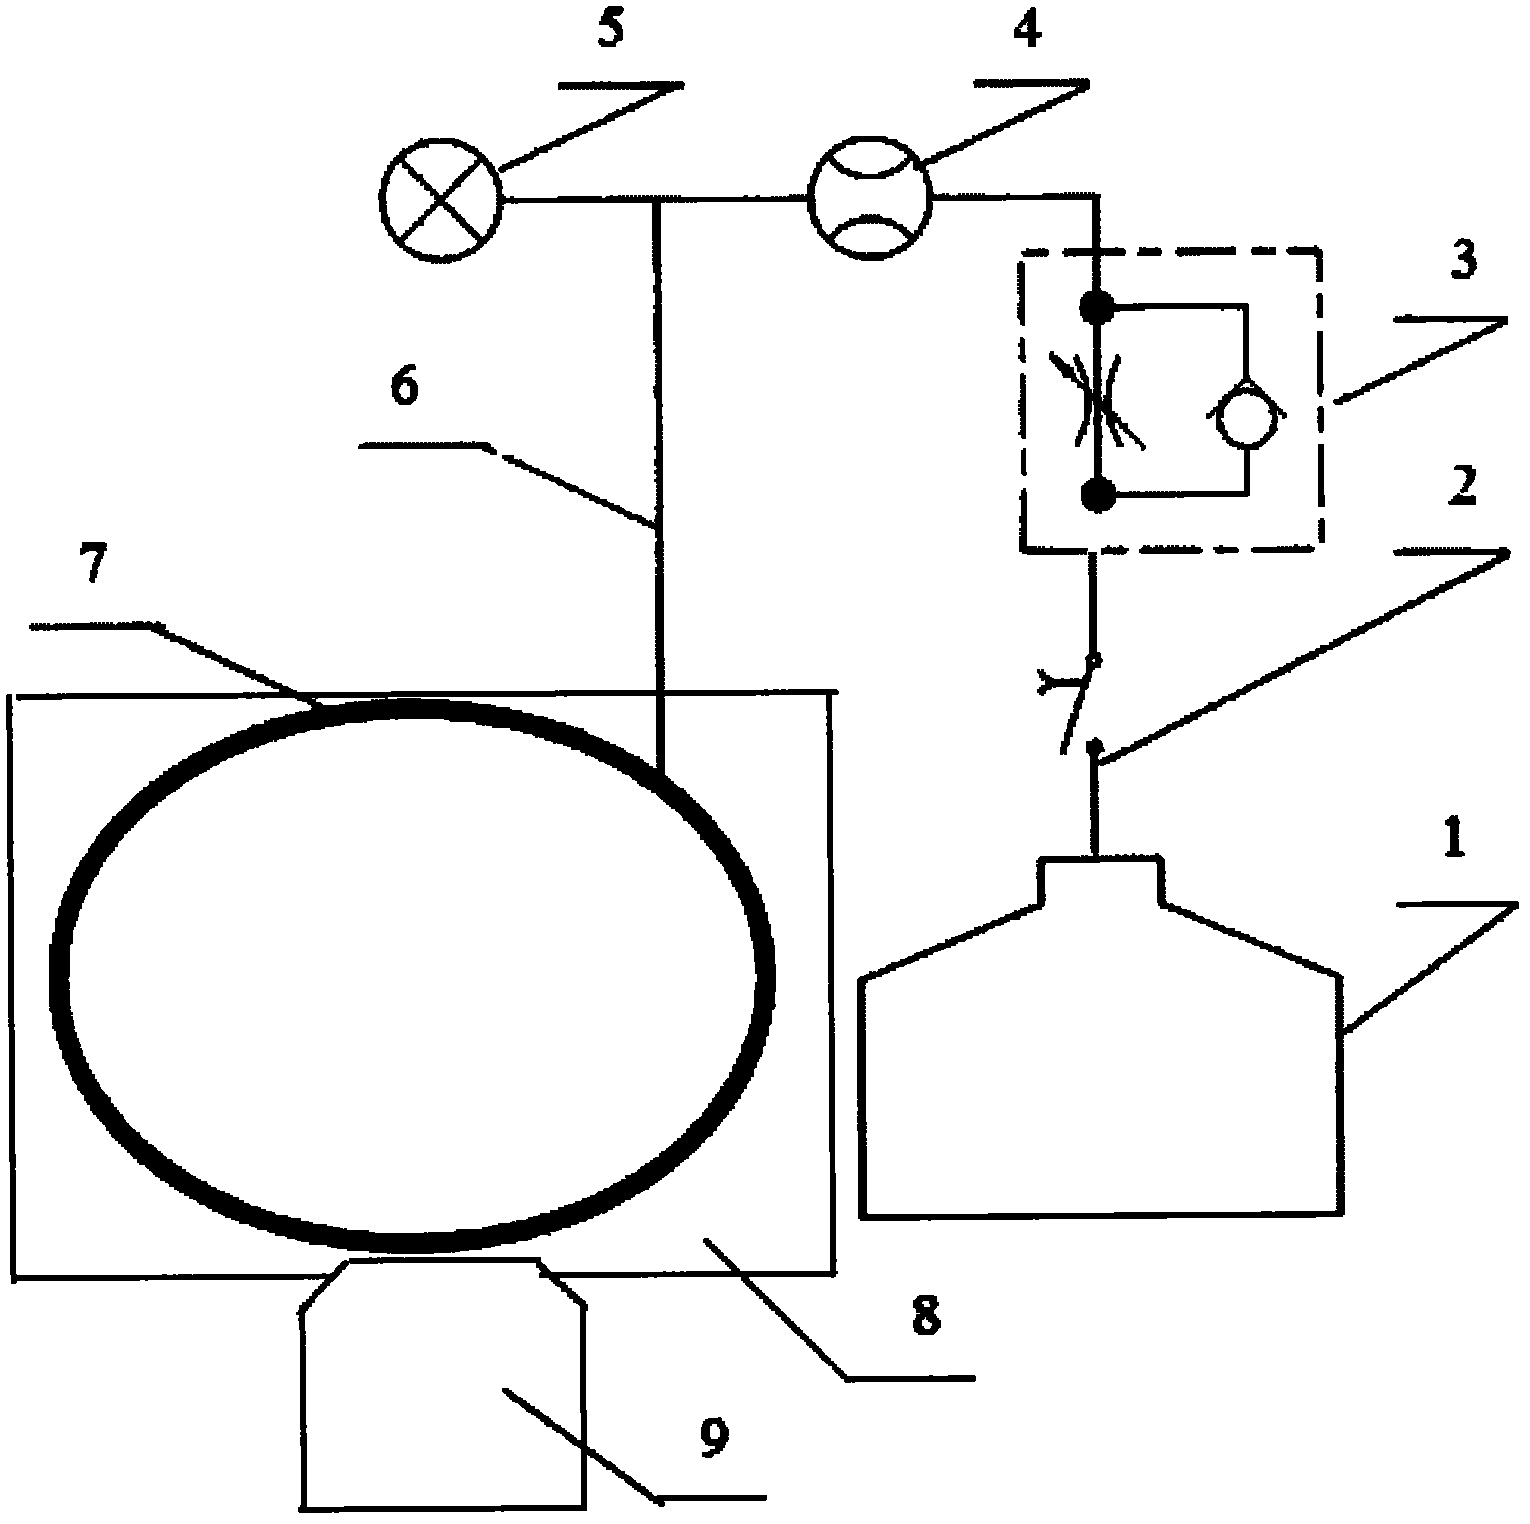 Lubrication simulation device for piston ring and cylinder sleeve of engine